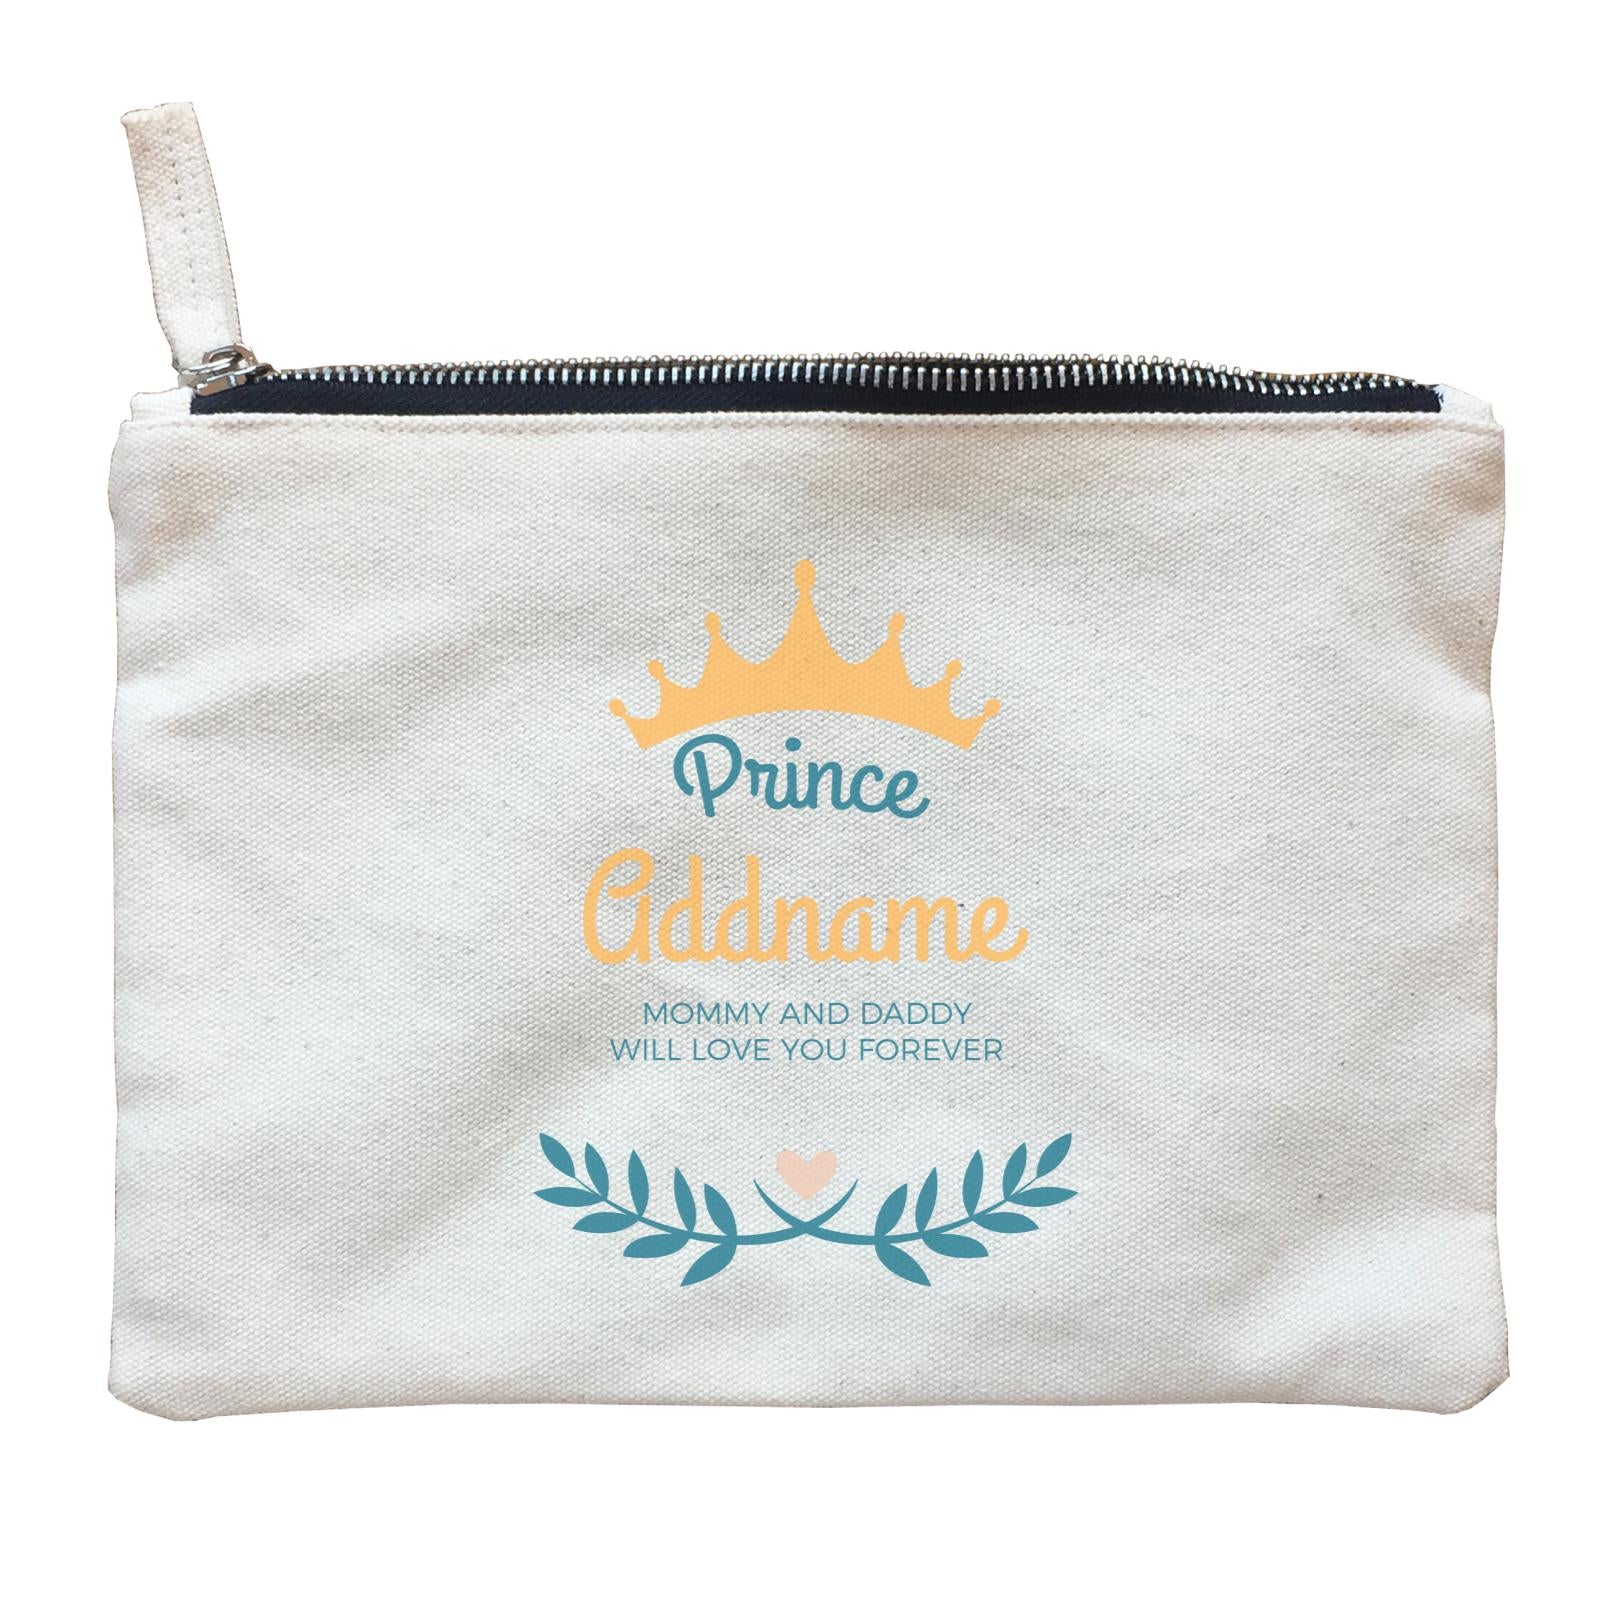 Prince with Crown and Blue Leaves Personalizable with Name and Text Zipper Pouch